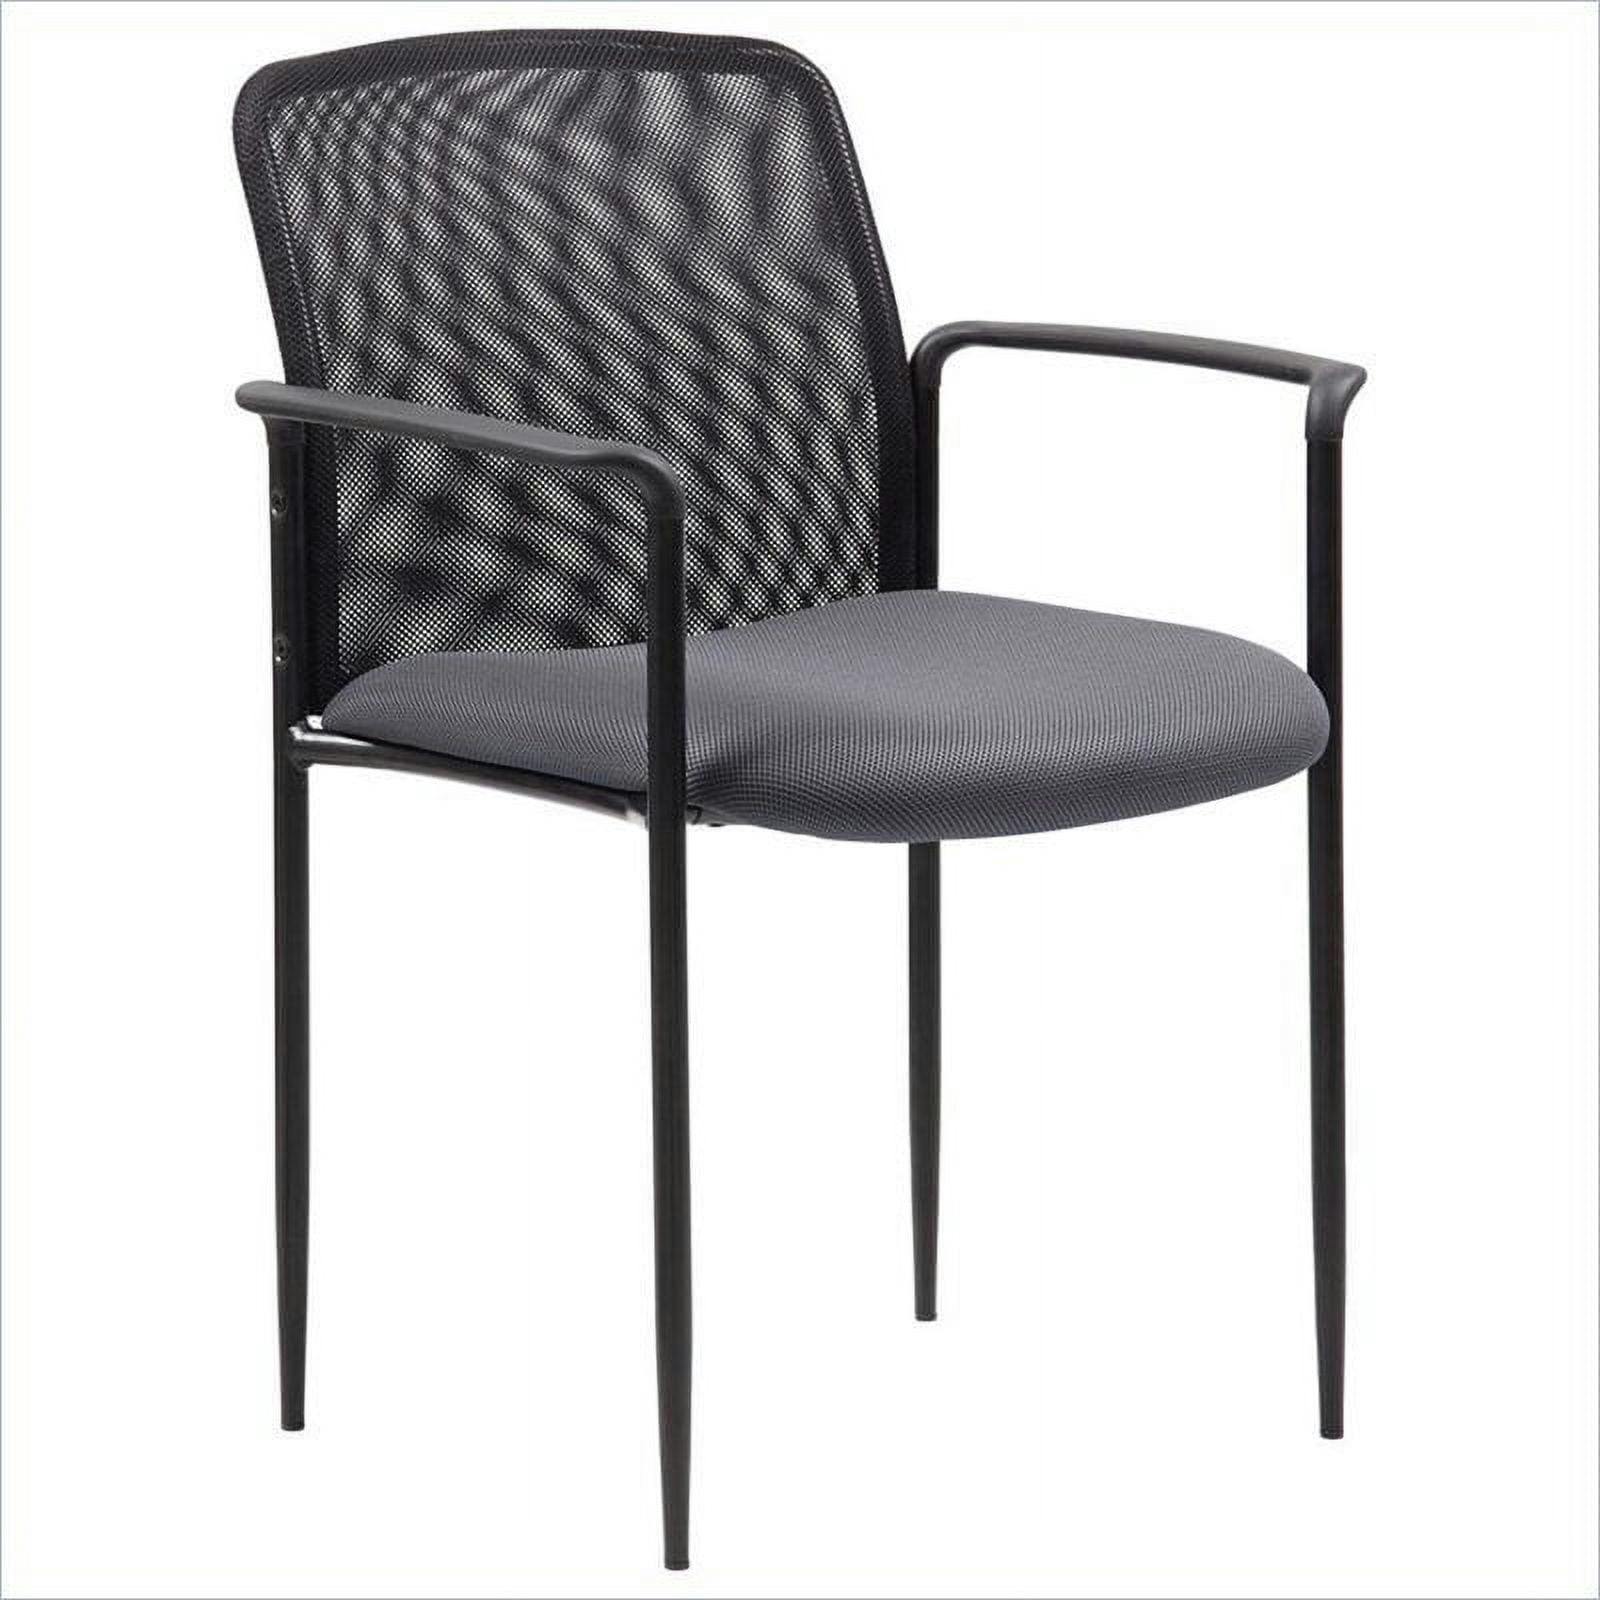 Contemporary Gray Mesh Stacking Guest Chair with Metal and Wood Accents